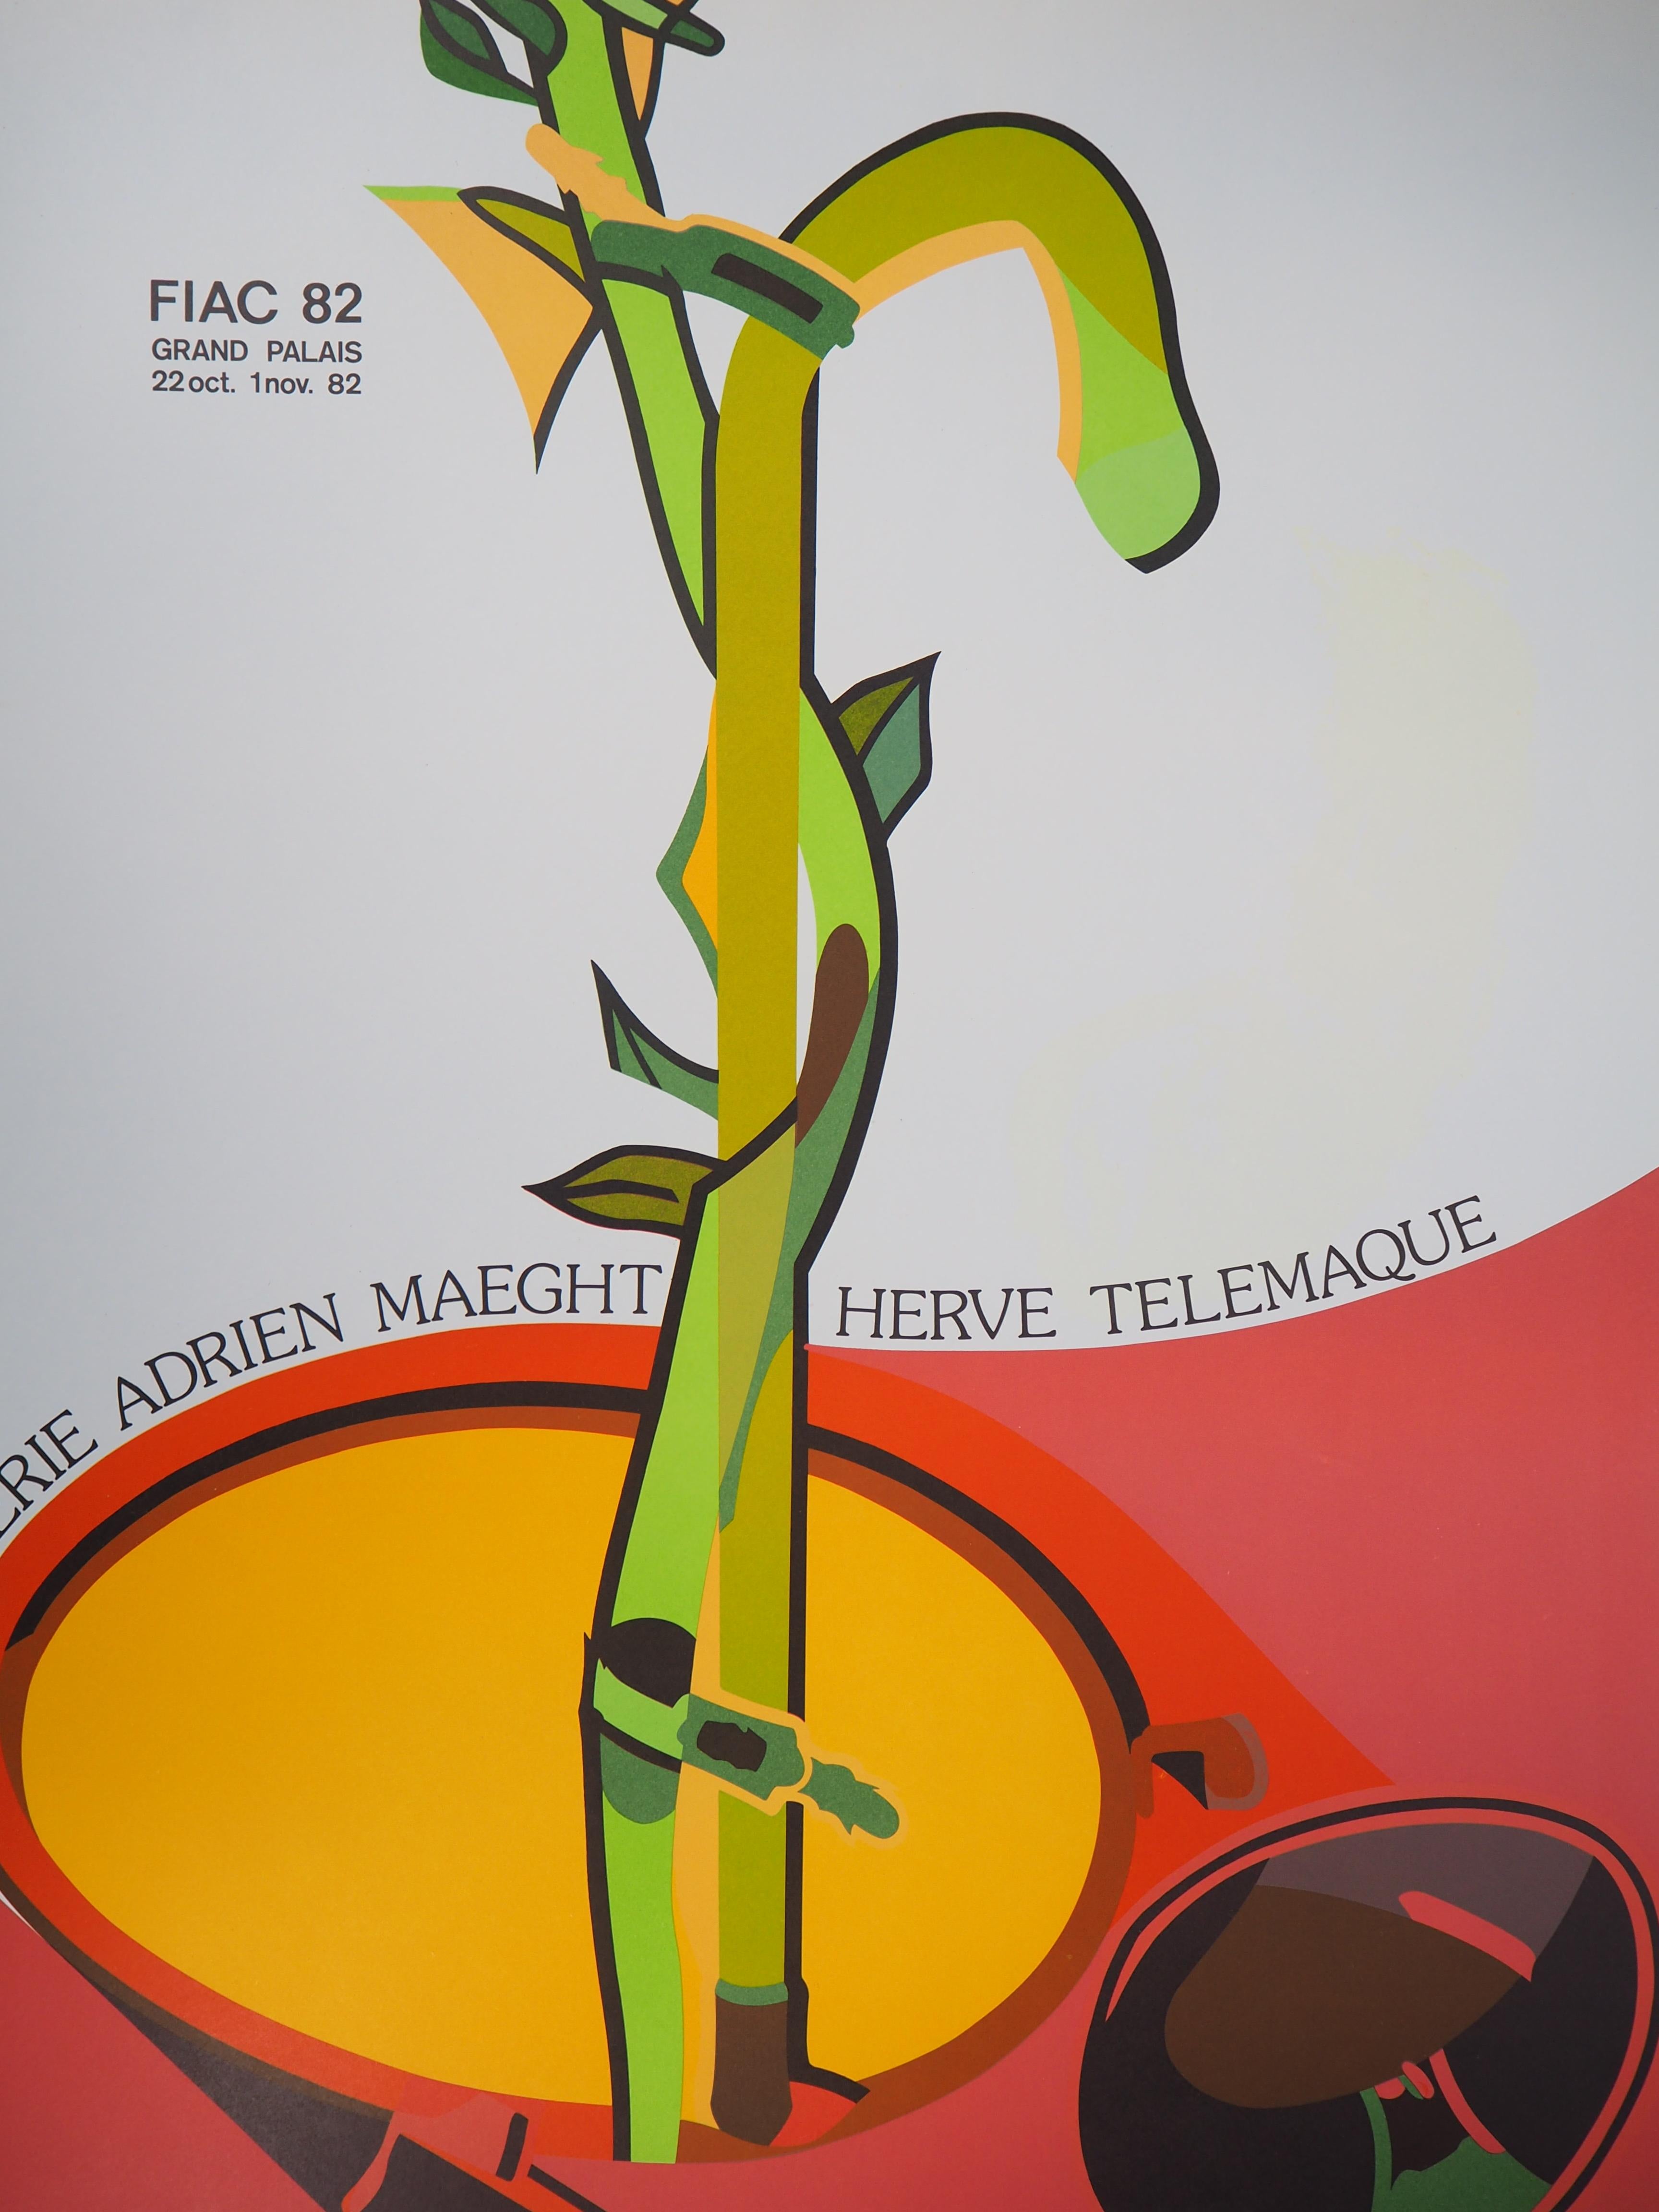 (Ecology) Germination, FIAC - Original vintage lithograph poster - Maeght 1982 - Print by Herve Telemaque